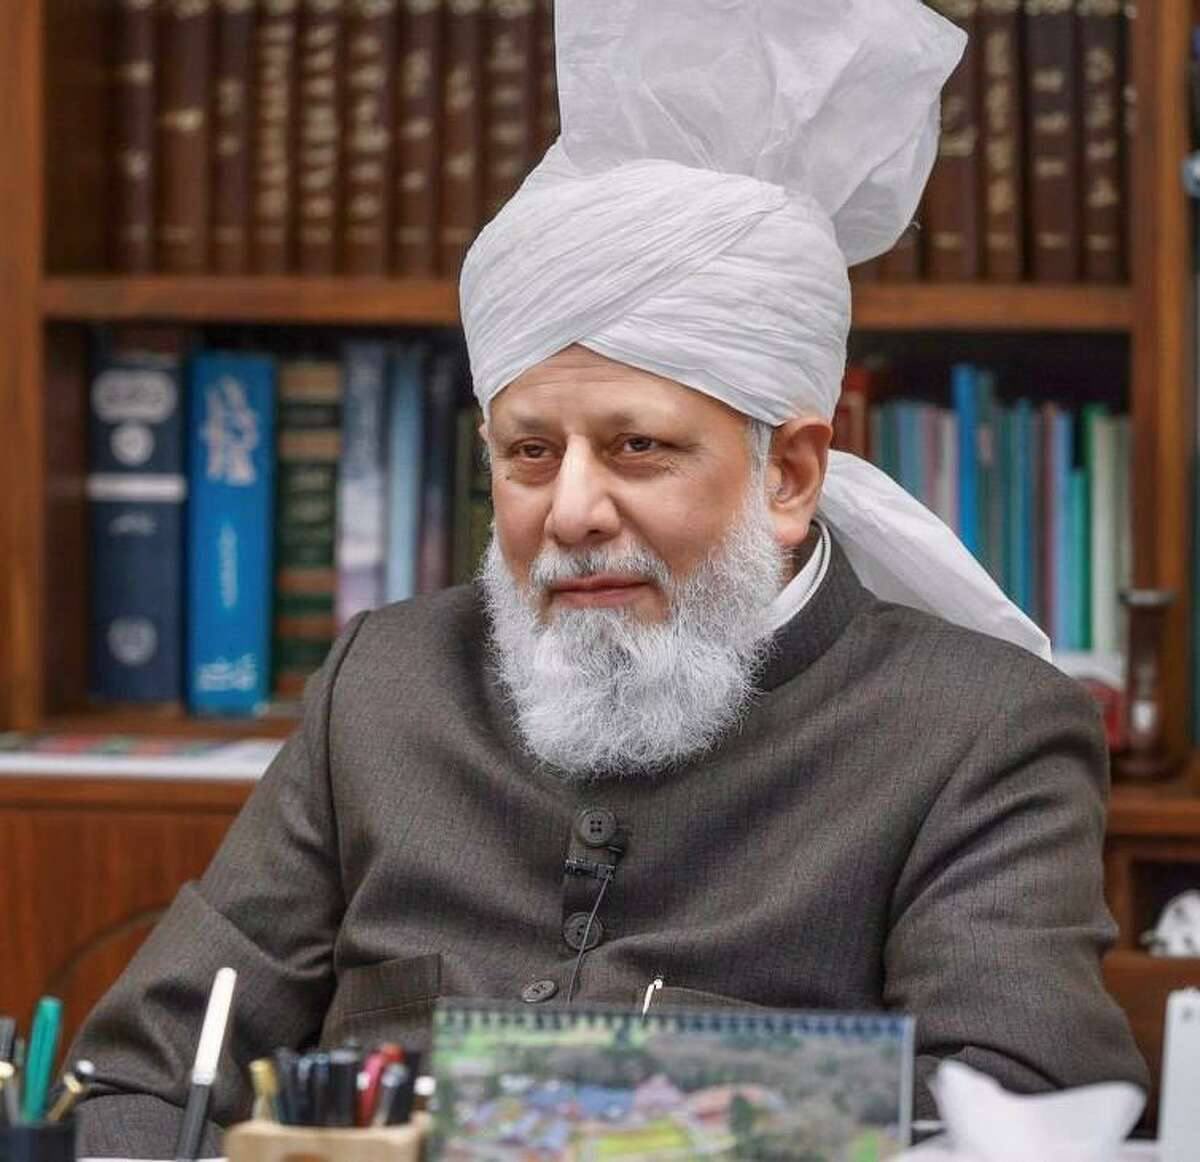 Following a successful medical procedure, Huzoor (aa) requests prayers During today’s Friday Sermon, Hazrat Mirza Masroor Ahmad, Khalifatul Masih V (aa) said: “Another prayer request I wish to make today is for myself. I have had a condition related to my heart valve for some…